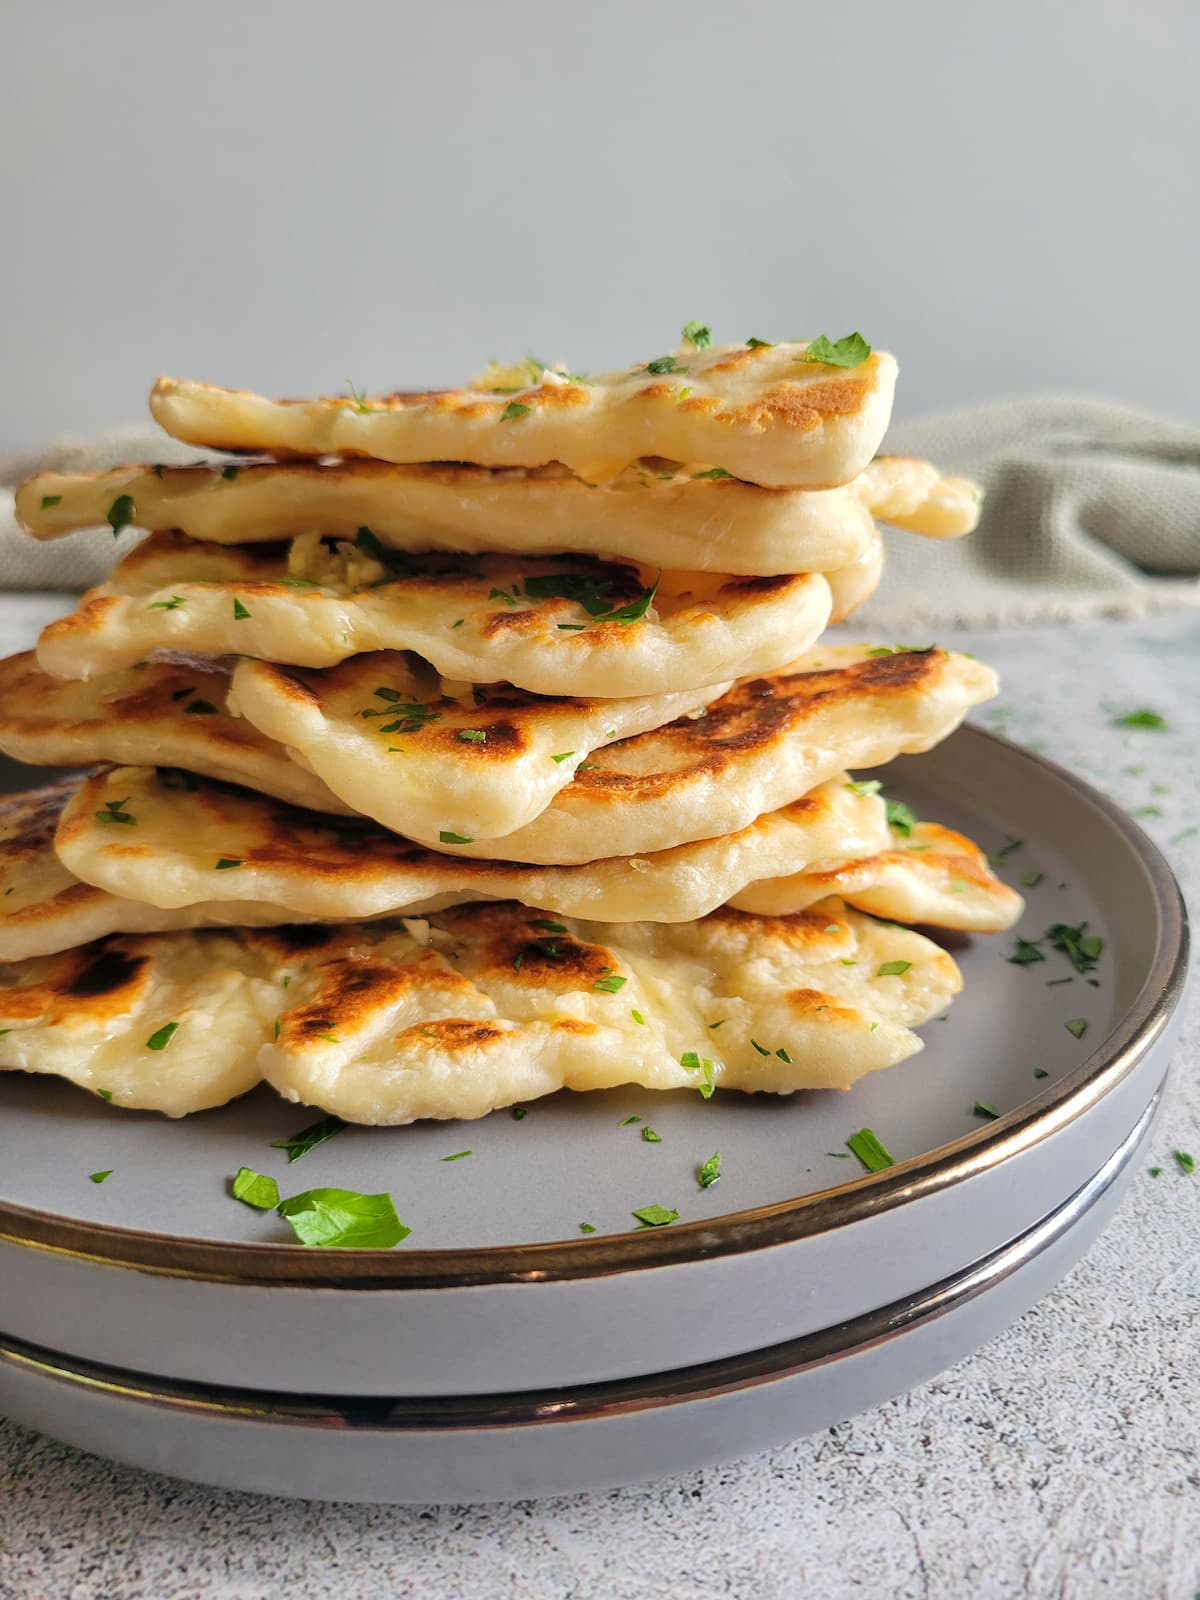 garlic naan bread piled on double plates